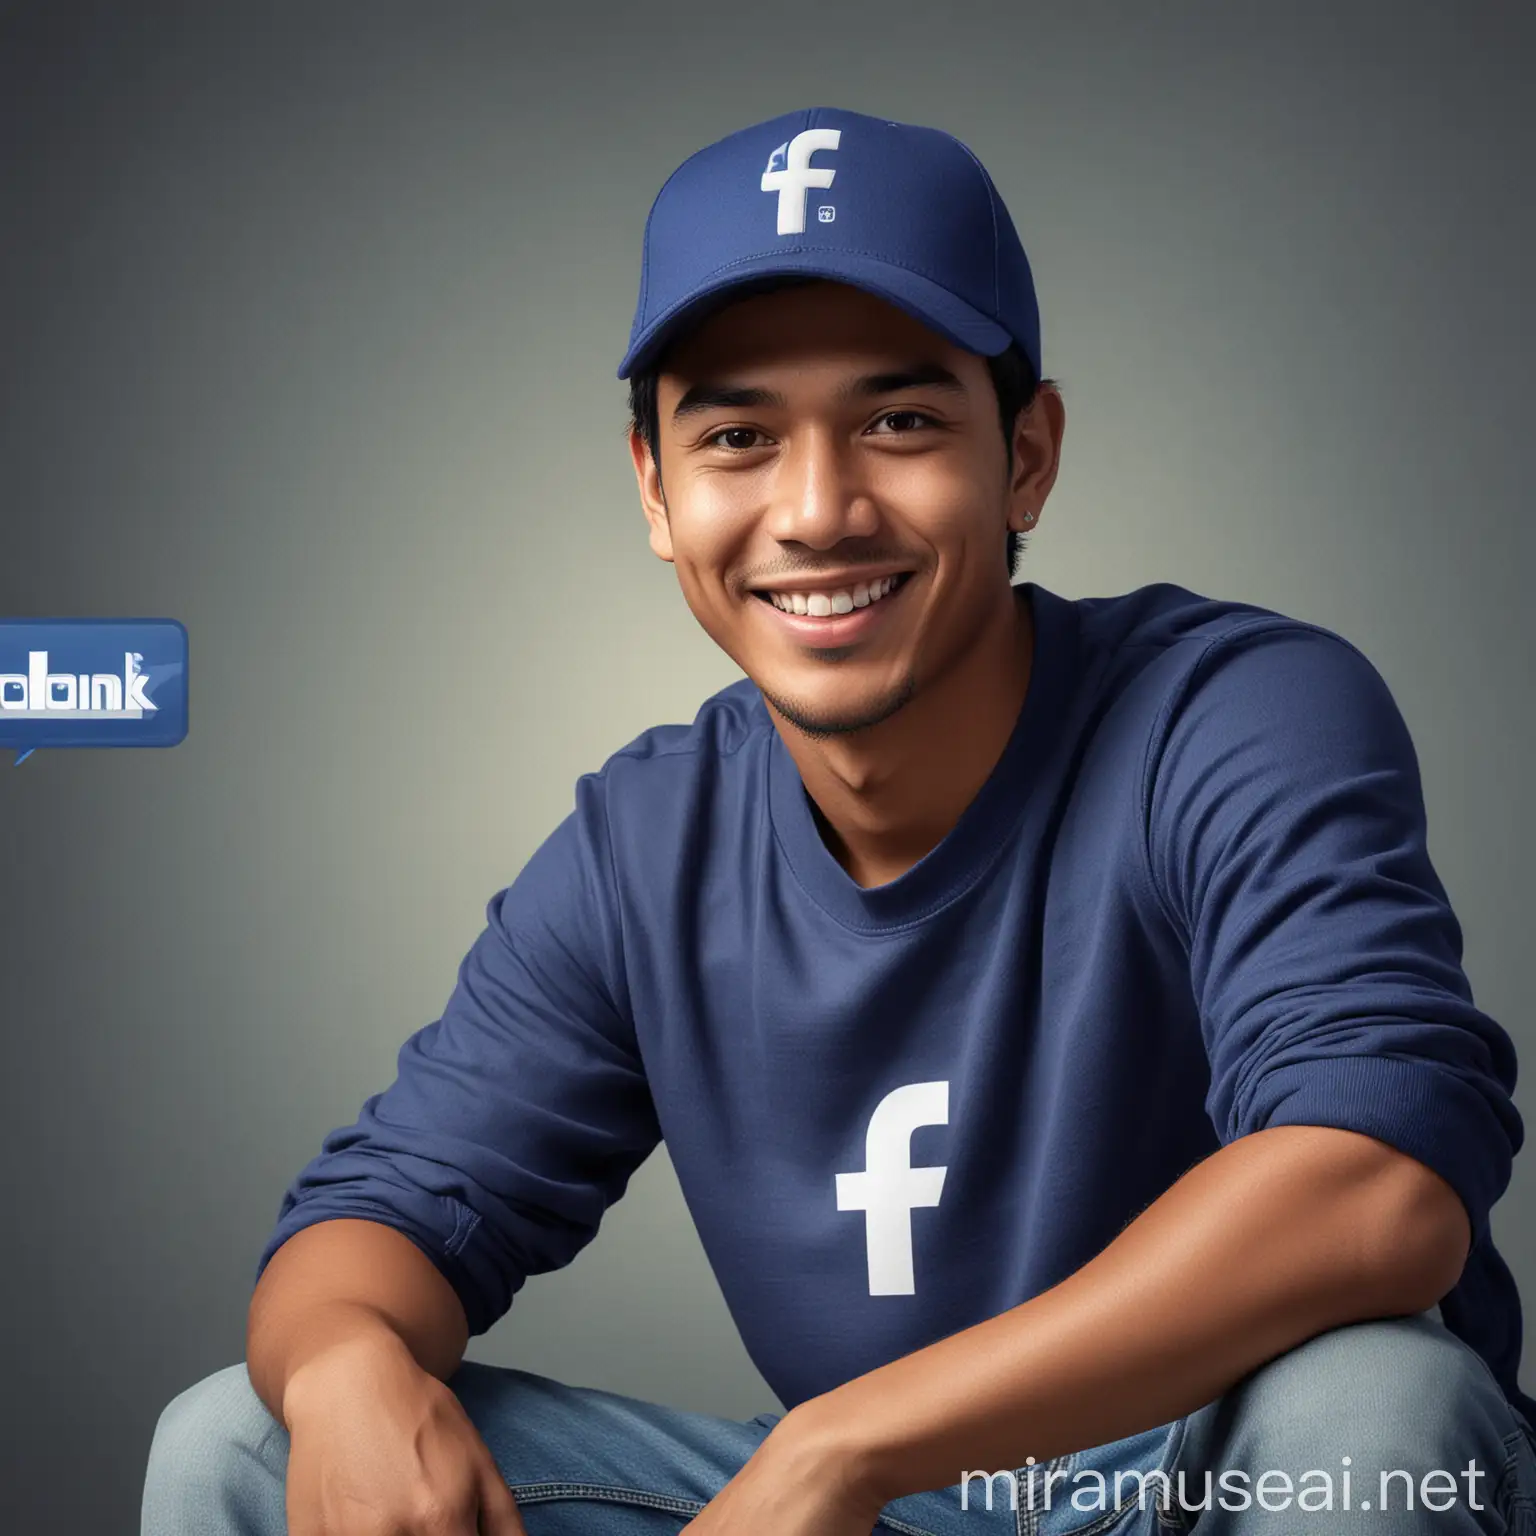 a 29 year old Indonesian young man smiling friendly, wearing a baseball cap with a narrow face, wearing a blue sweater, wearing sports shoes, sitting relaxed, behind him is the Facebook logo, home page and Facebook profile with the words "UDIN CHARLY", photography, realistic, 8k